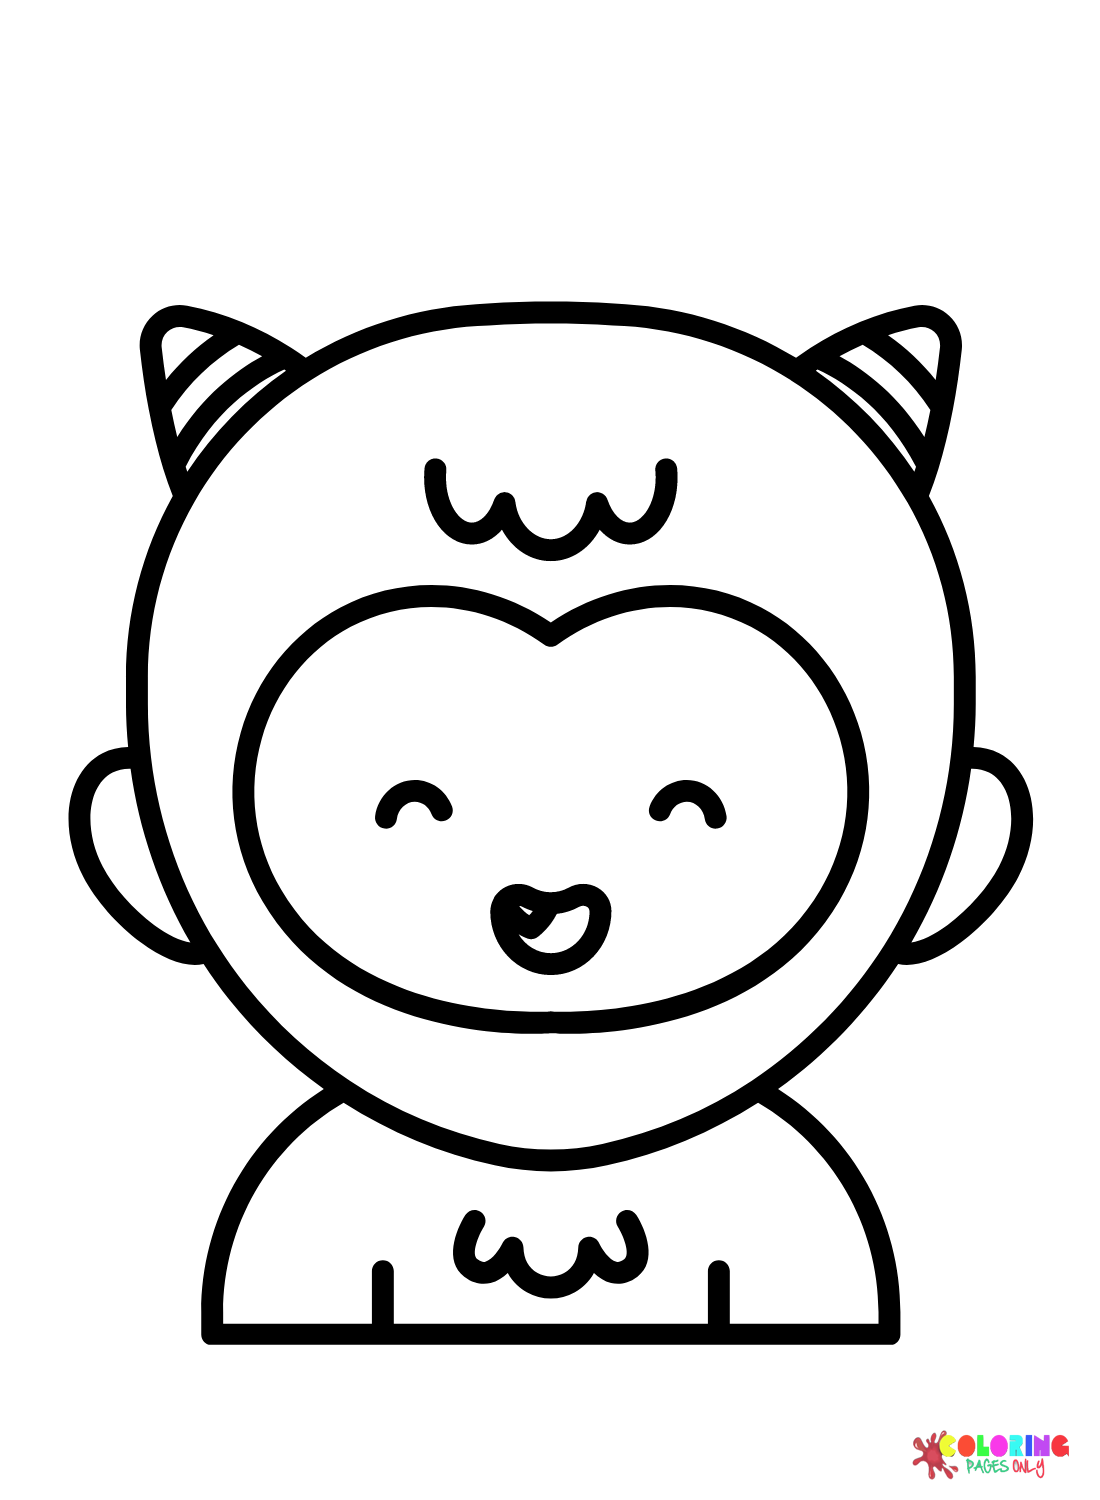 Cute Yeti Coloring Page